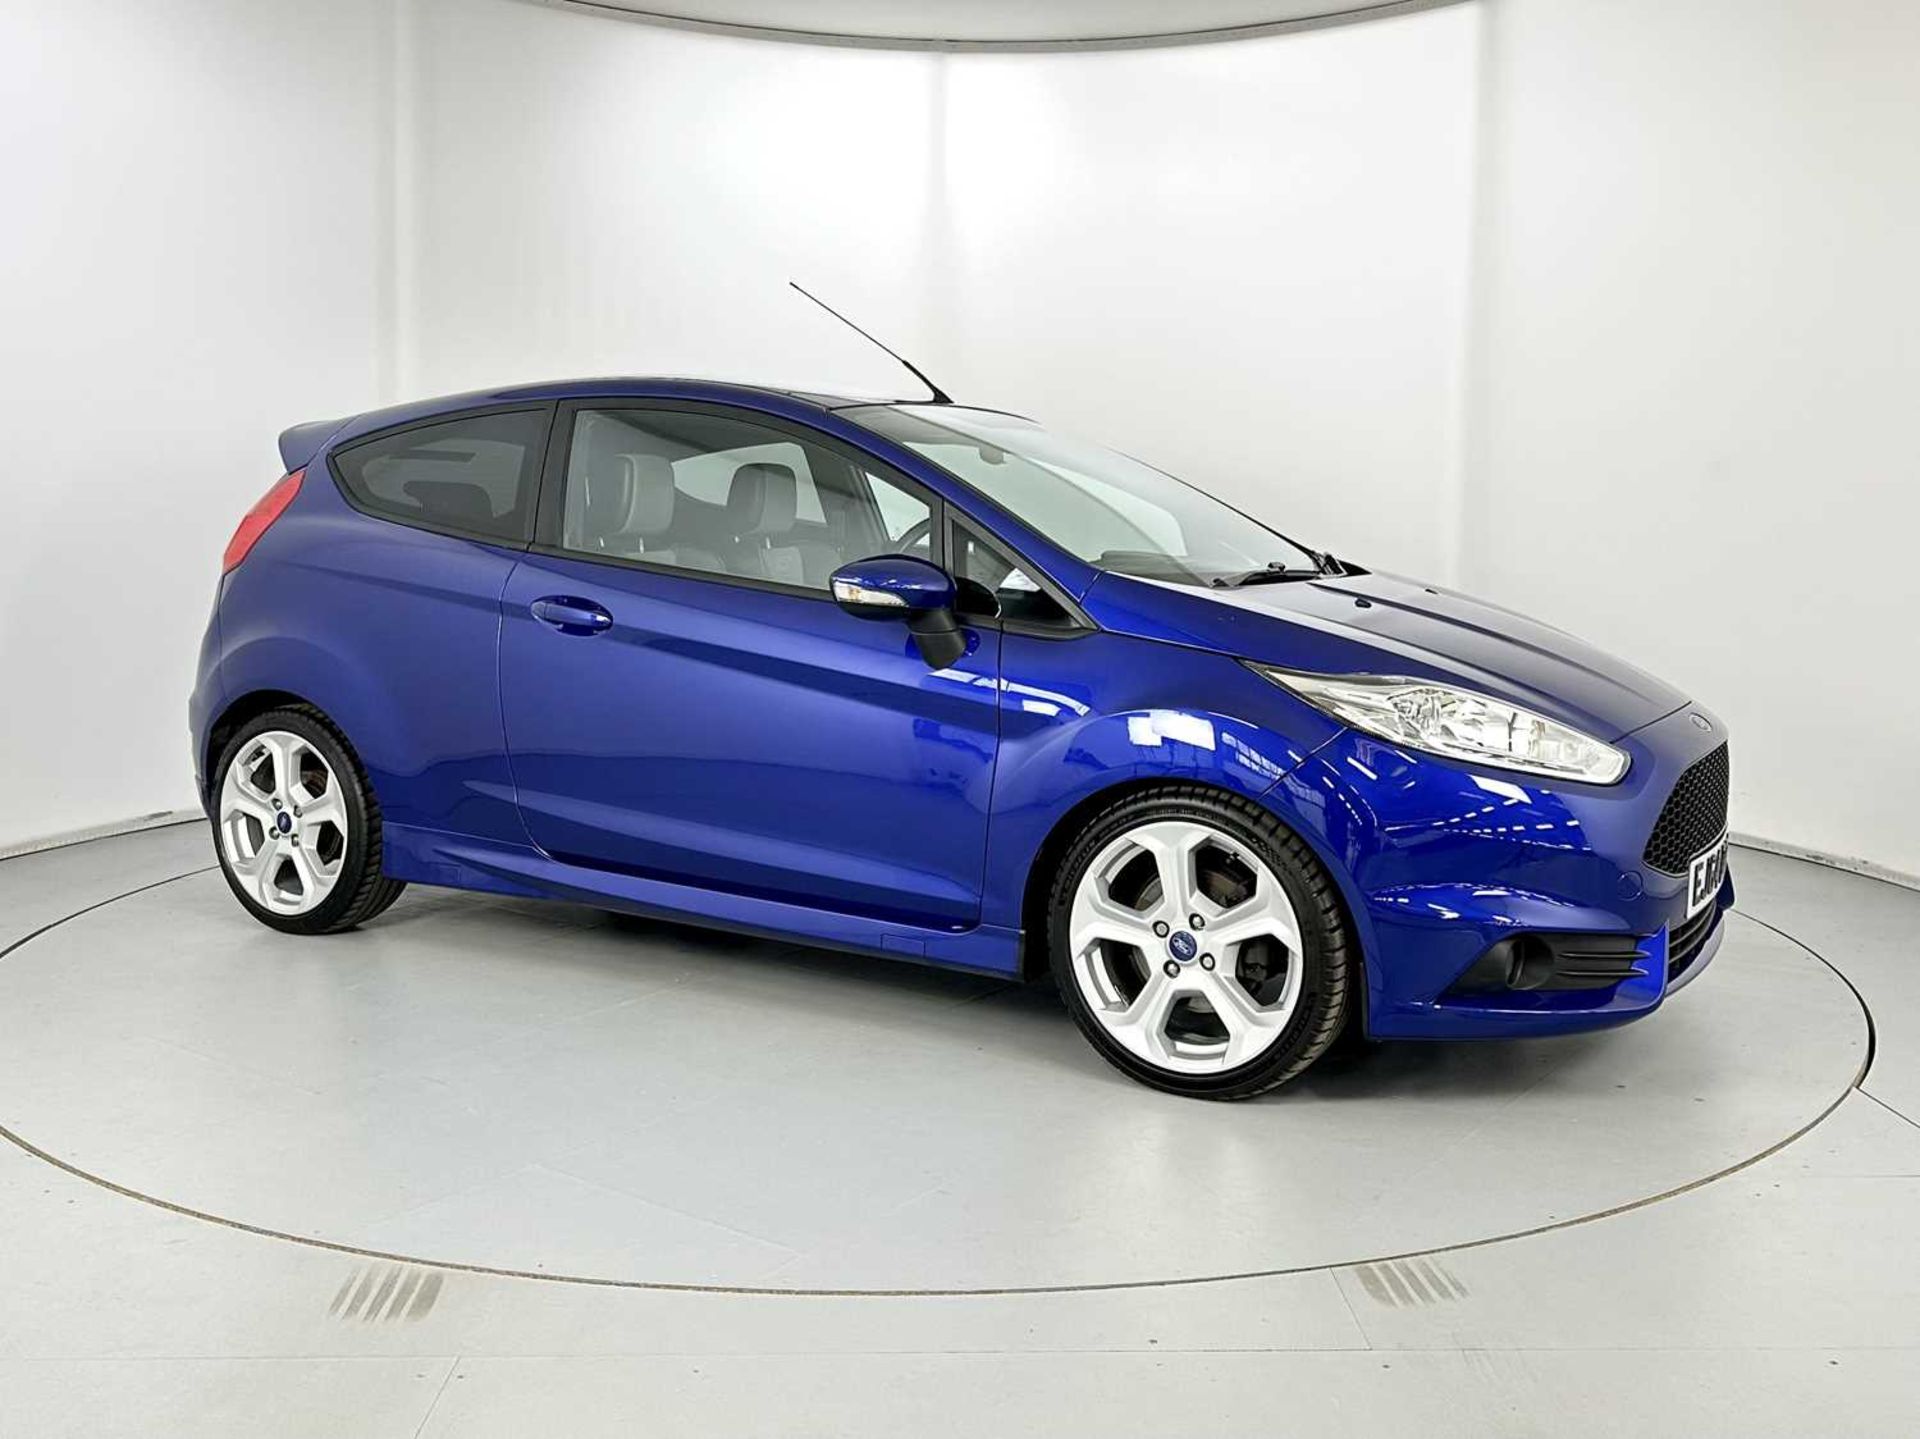 2014 Ford Fiesta ST Forged engine rebuild - Image 12 of 33